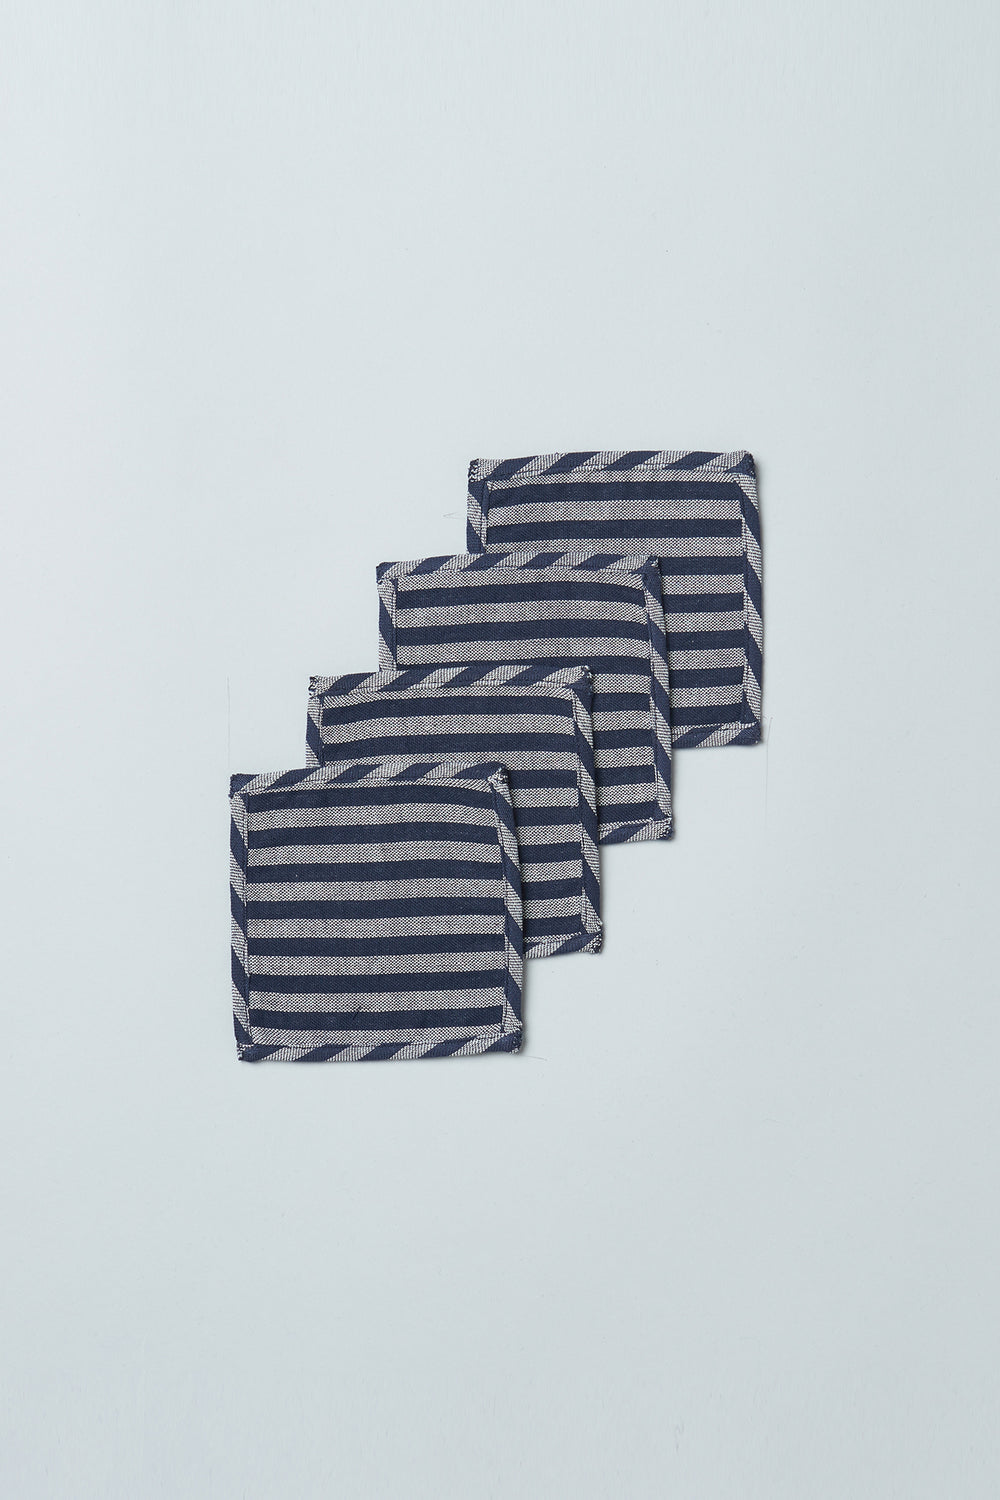 Handwoven Upcycled Coasters (Set of 4) - Navy Stripe